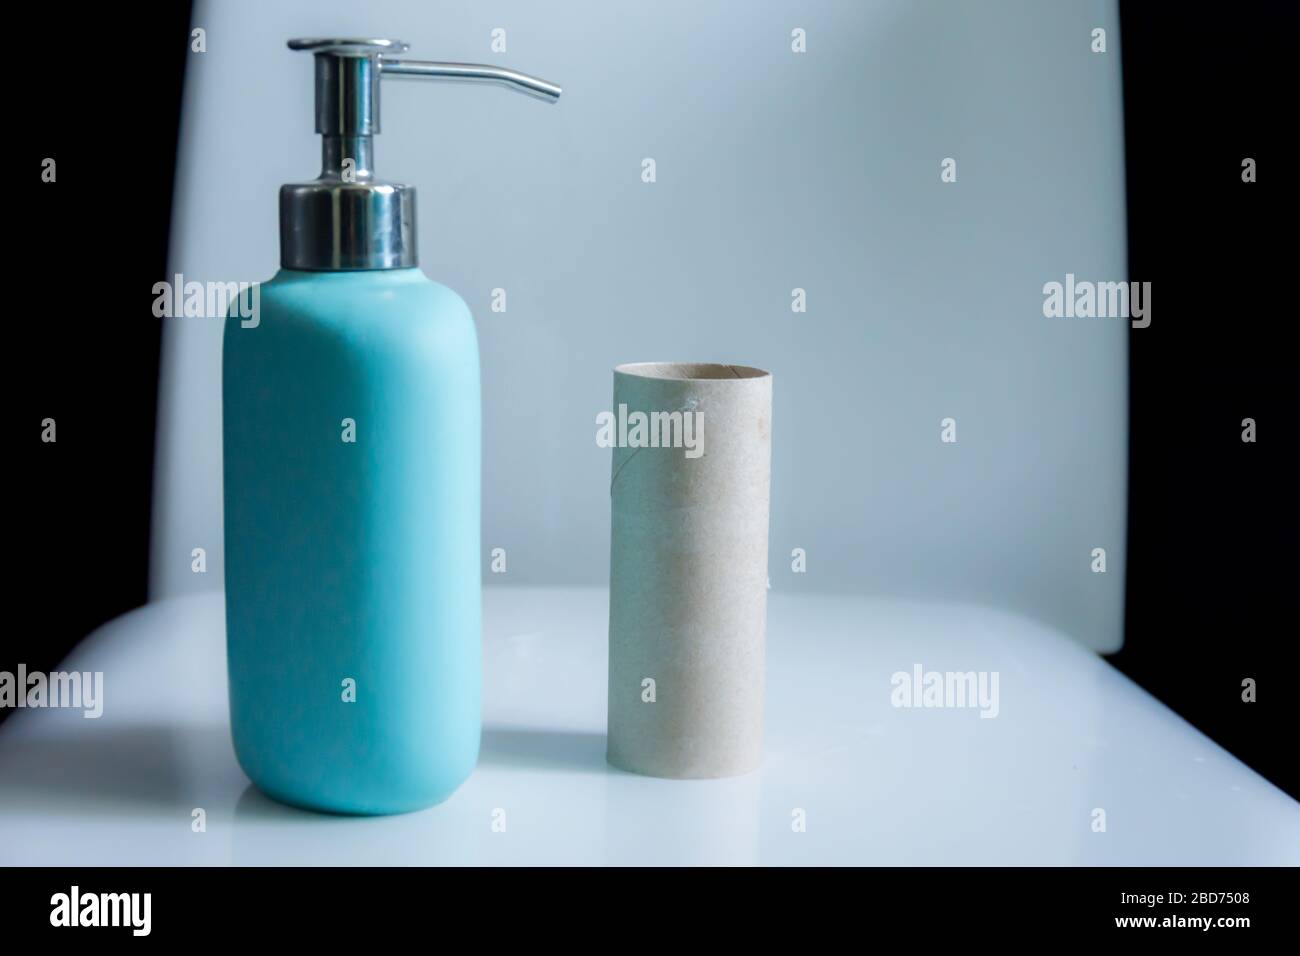 Toilet paper roll placed on a commod along with hand soap. Hygeine concept, Sweden Stock Photo